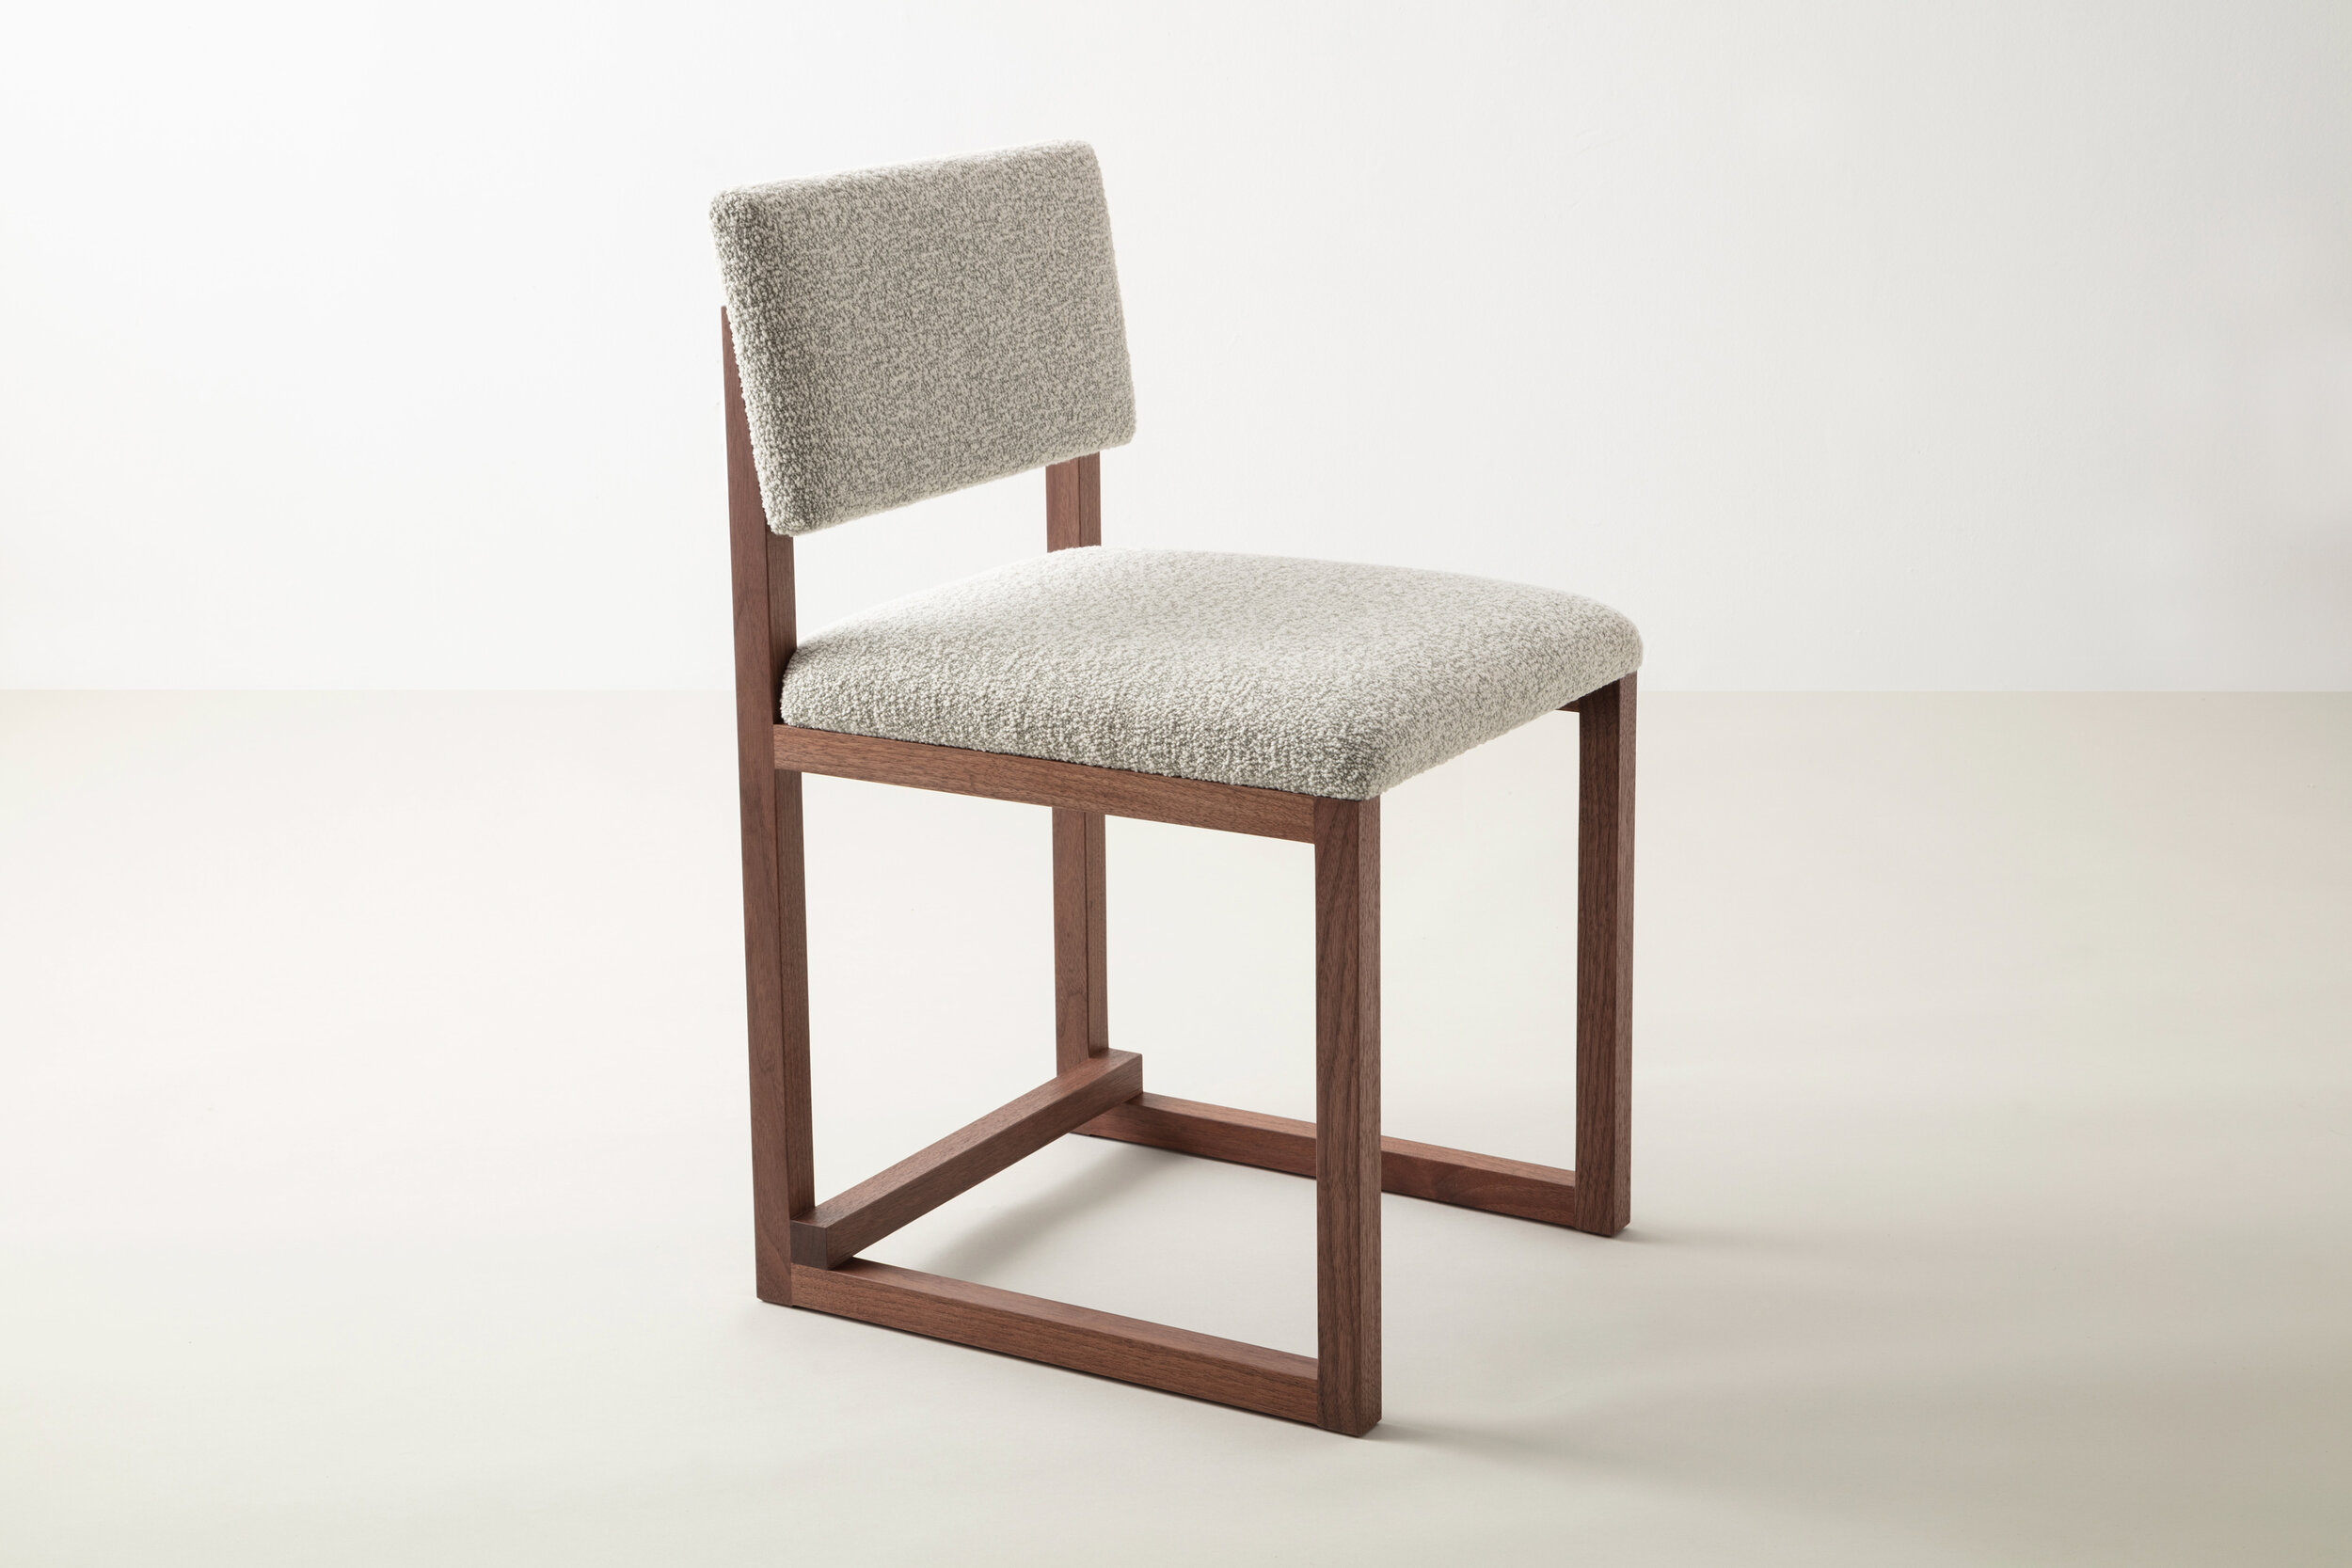 SQ Upholstered Dining Chair by David Gaynor Design